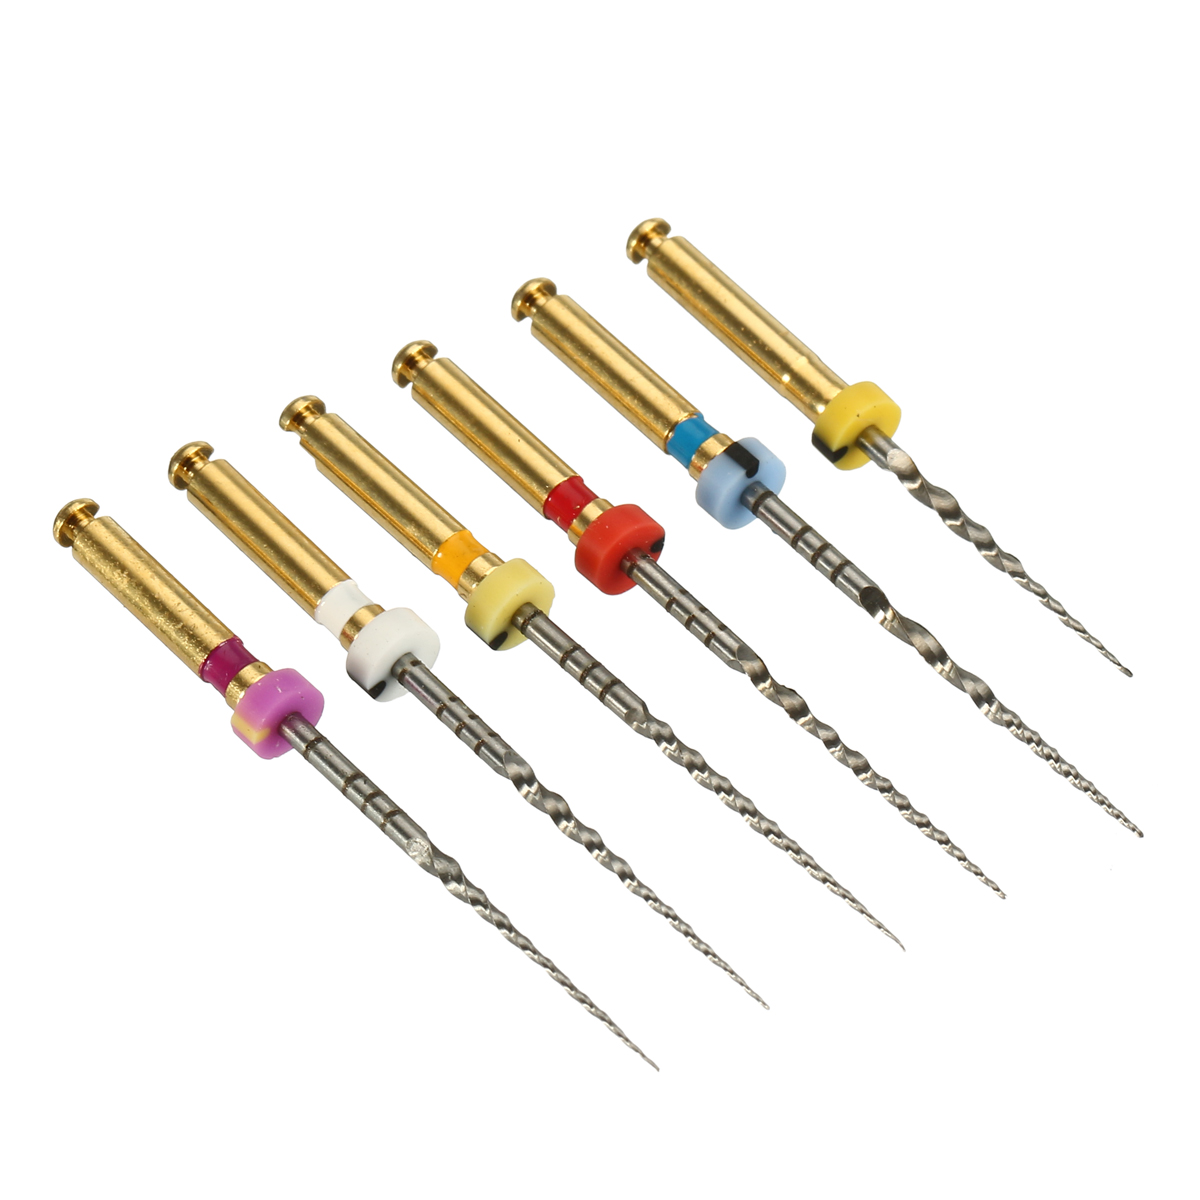 

6pc Dental Heat Activated Niti Endodontic Root Canal File